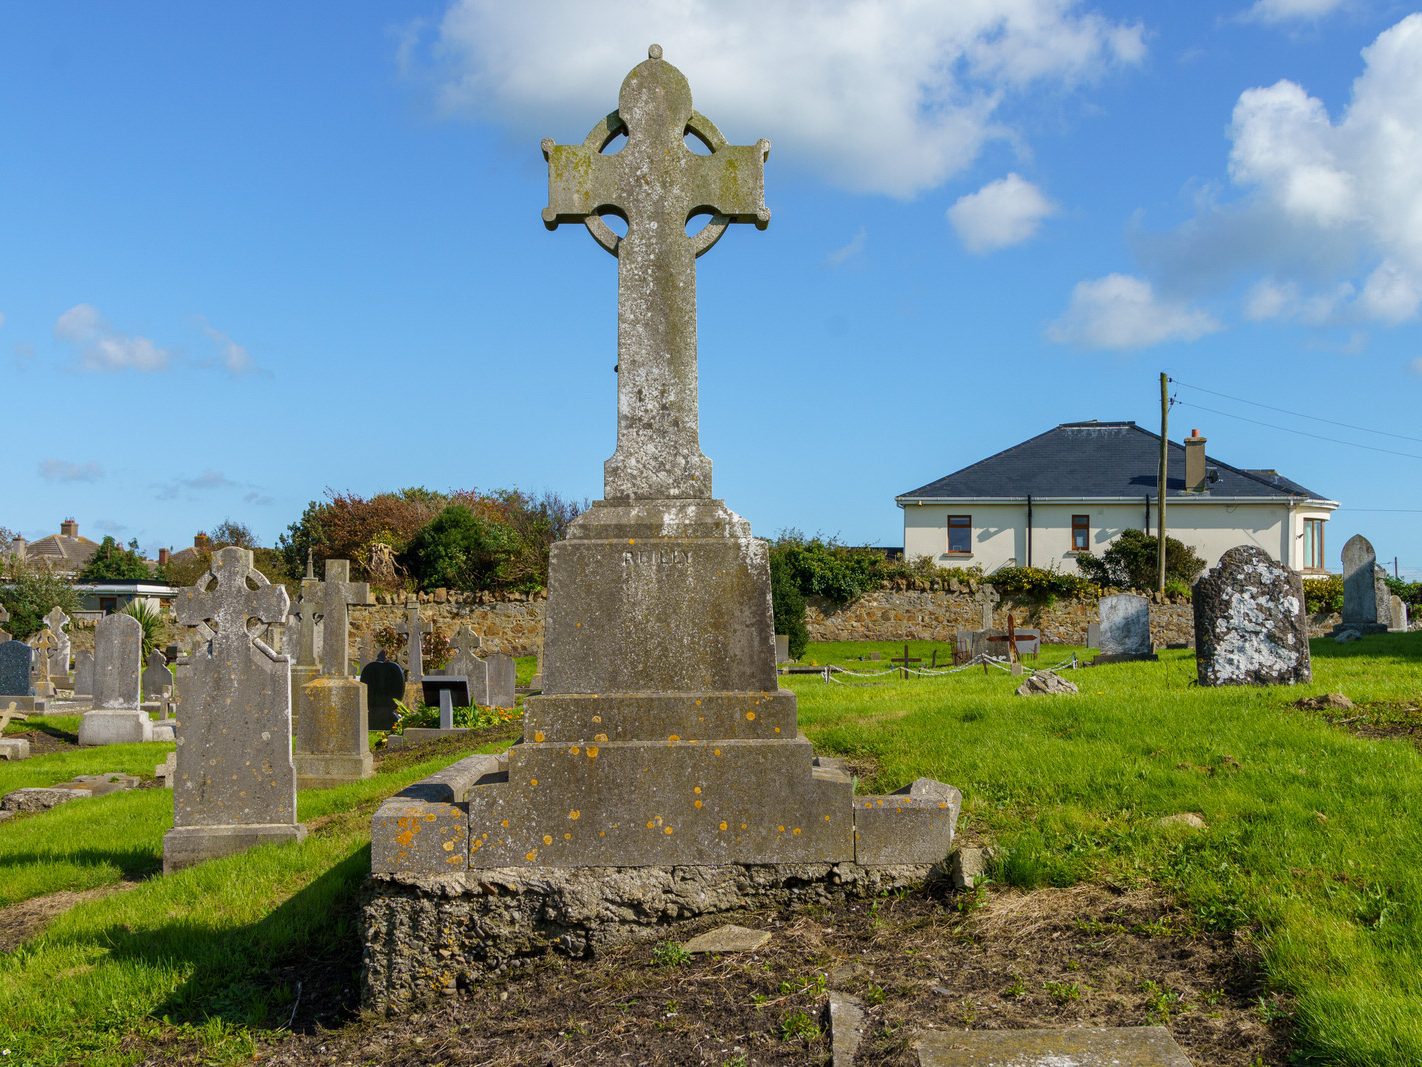 TODAY I MANAGED TO VISIT KILBARRACK CEMETERY [AFTER A NUMBER OF FAILED ATTEMPTS OVER A PERIOD OF TEN YEARS] 002